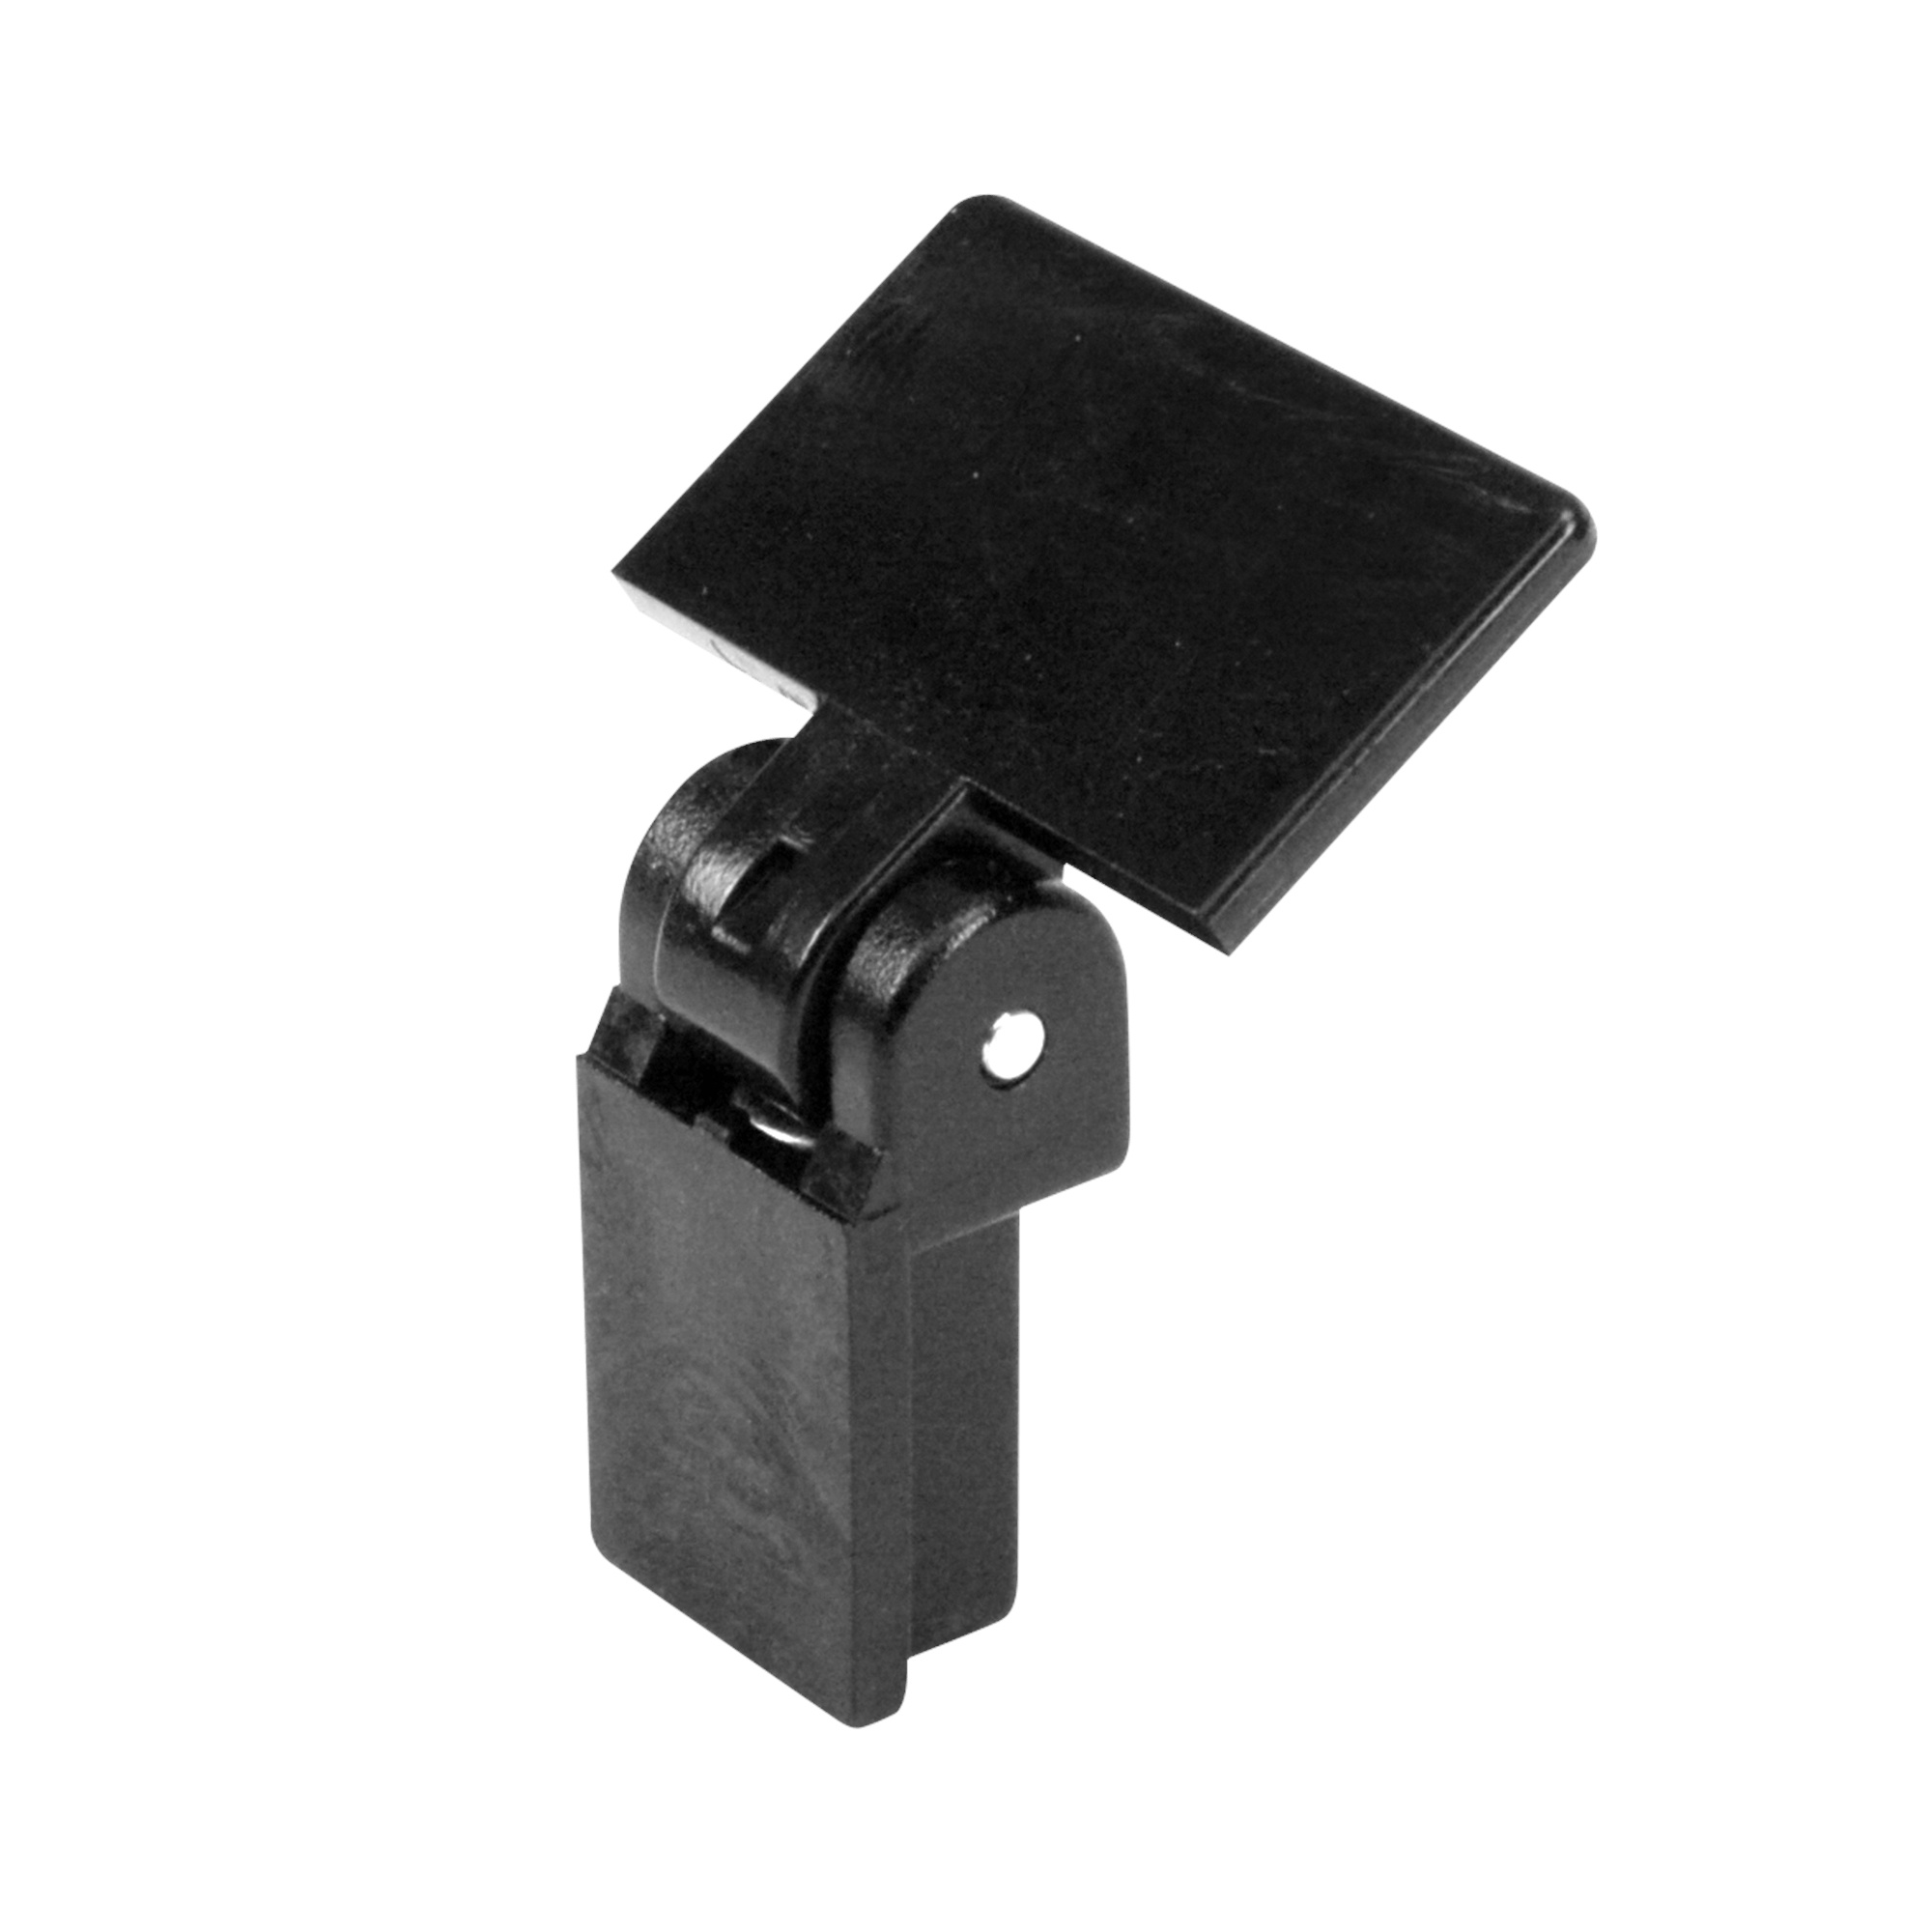 Audio Technica 701-5500-5405 Replacement Hinge Assembly for Turntables